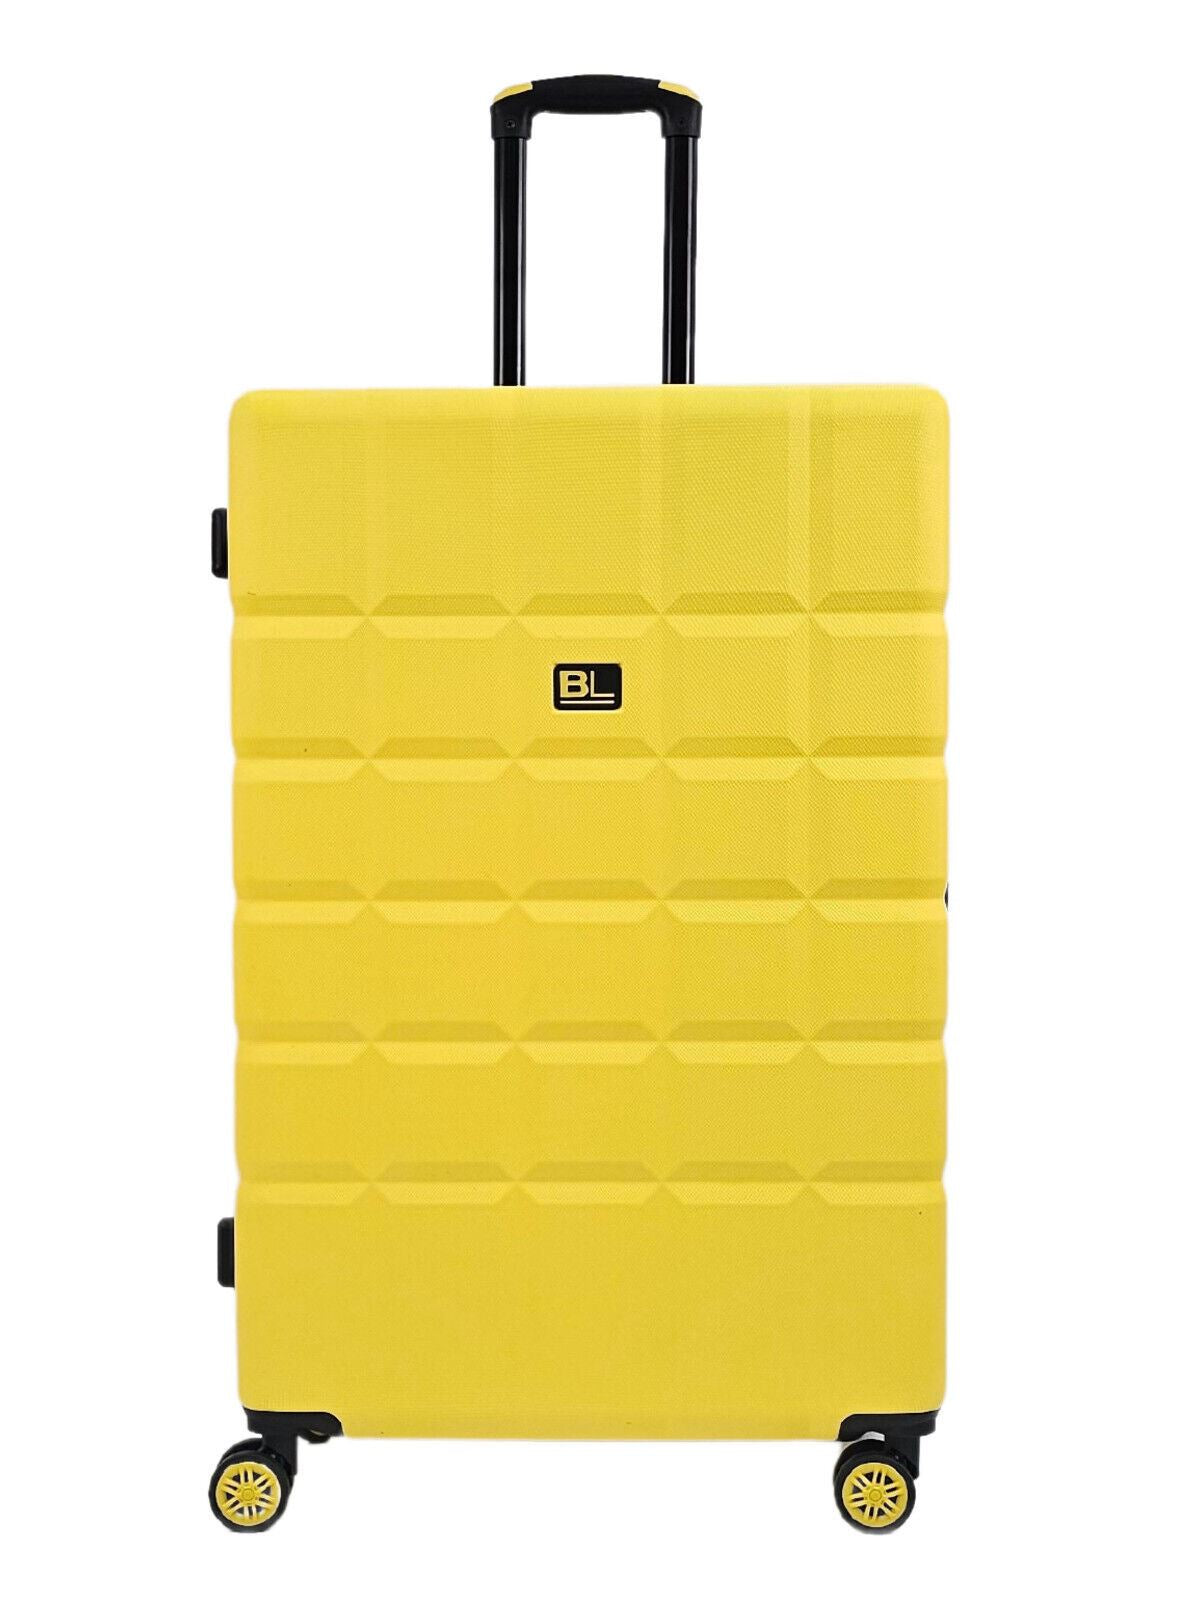 Coker Large Soft Shell Suitcase in Yellow